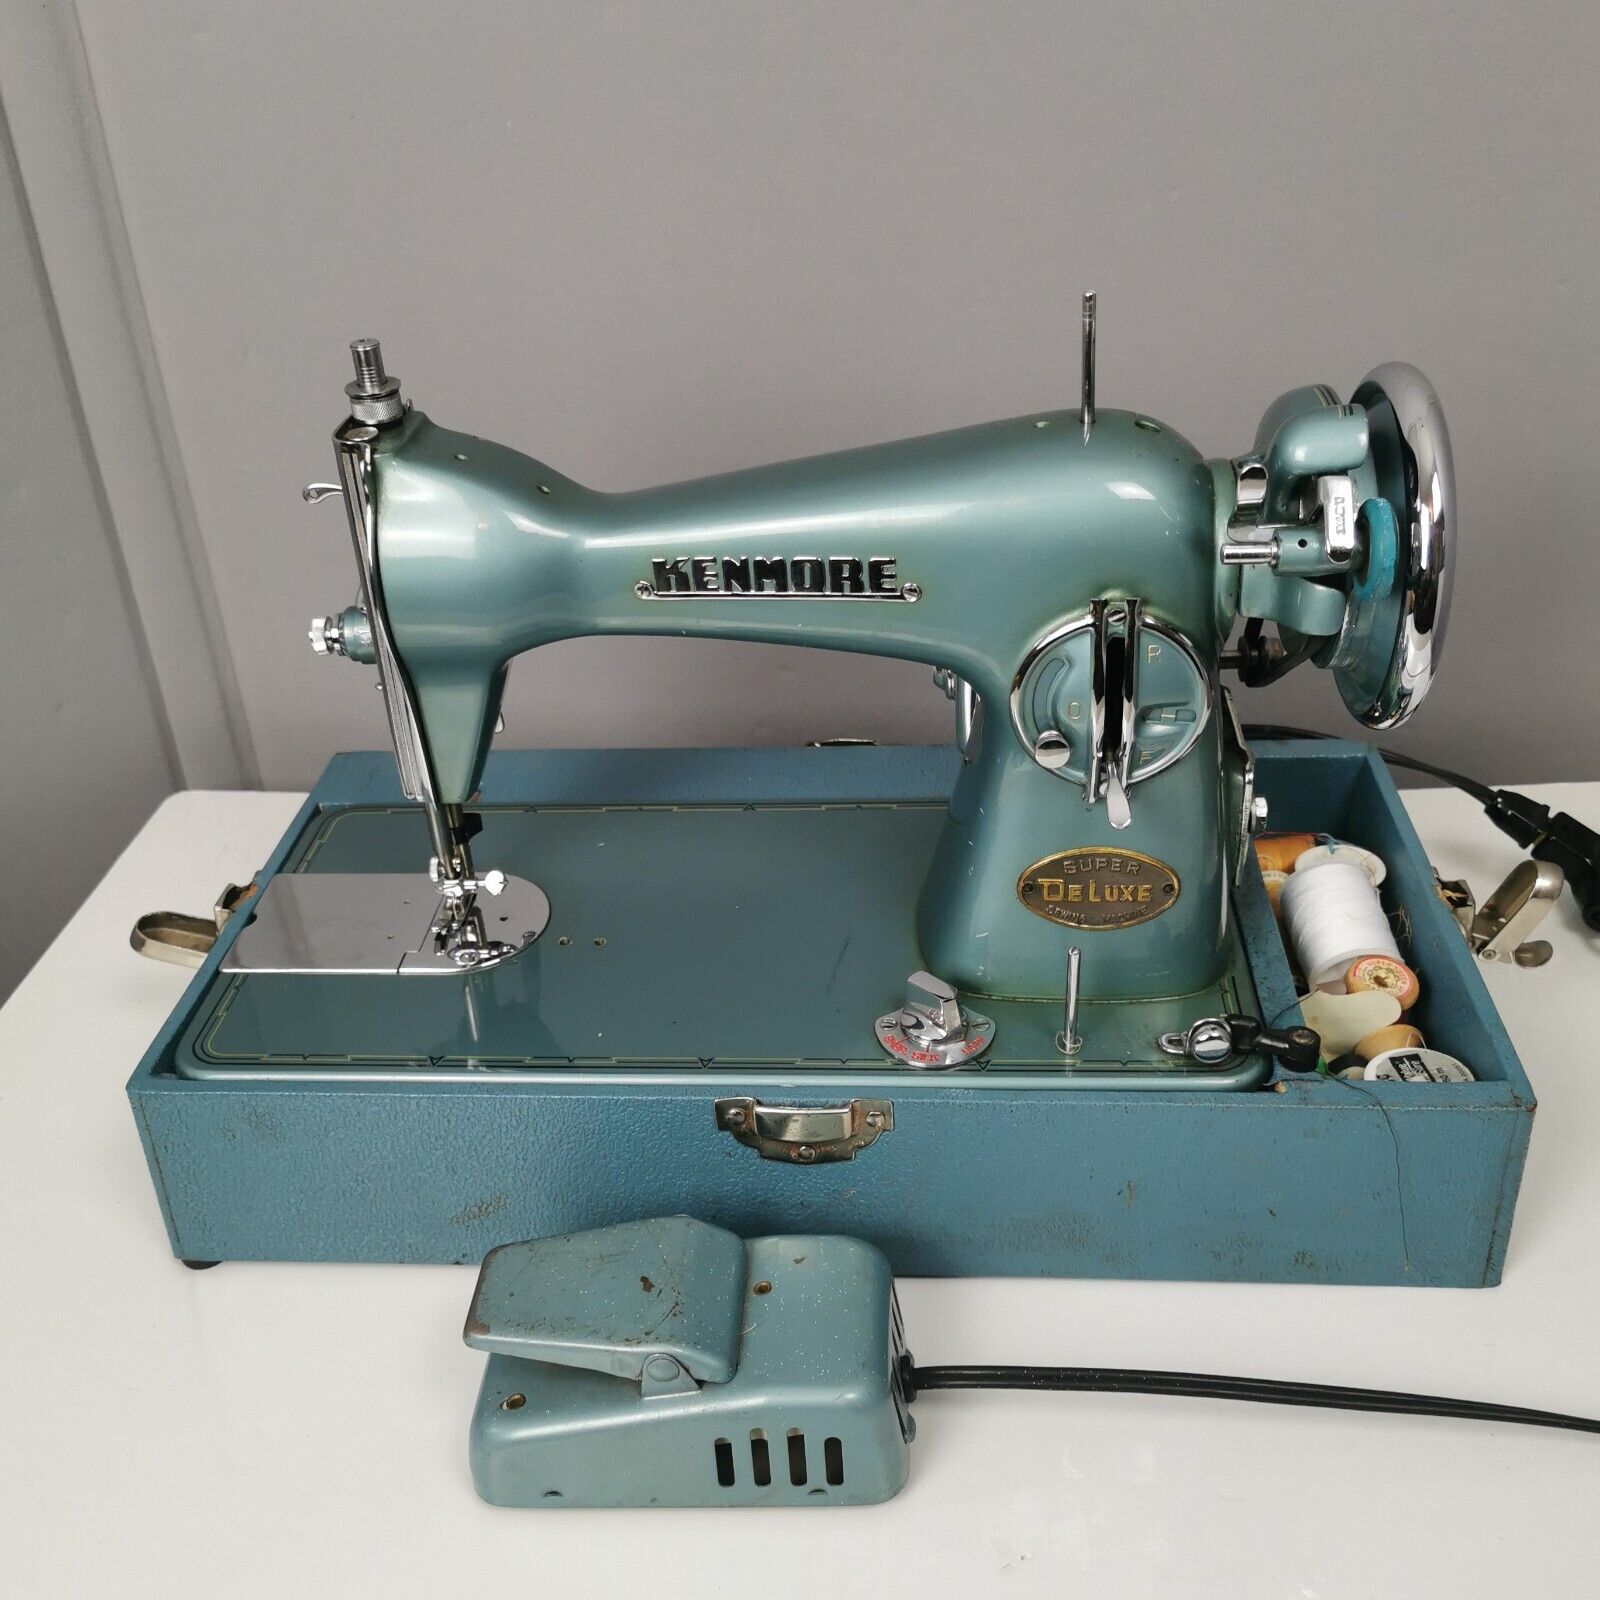 Vintage Kenmore Super Deluxe Household Sewing Machine blue Heavy duty